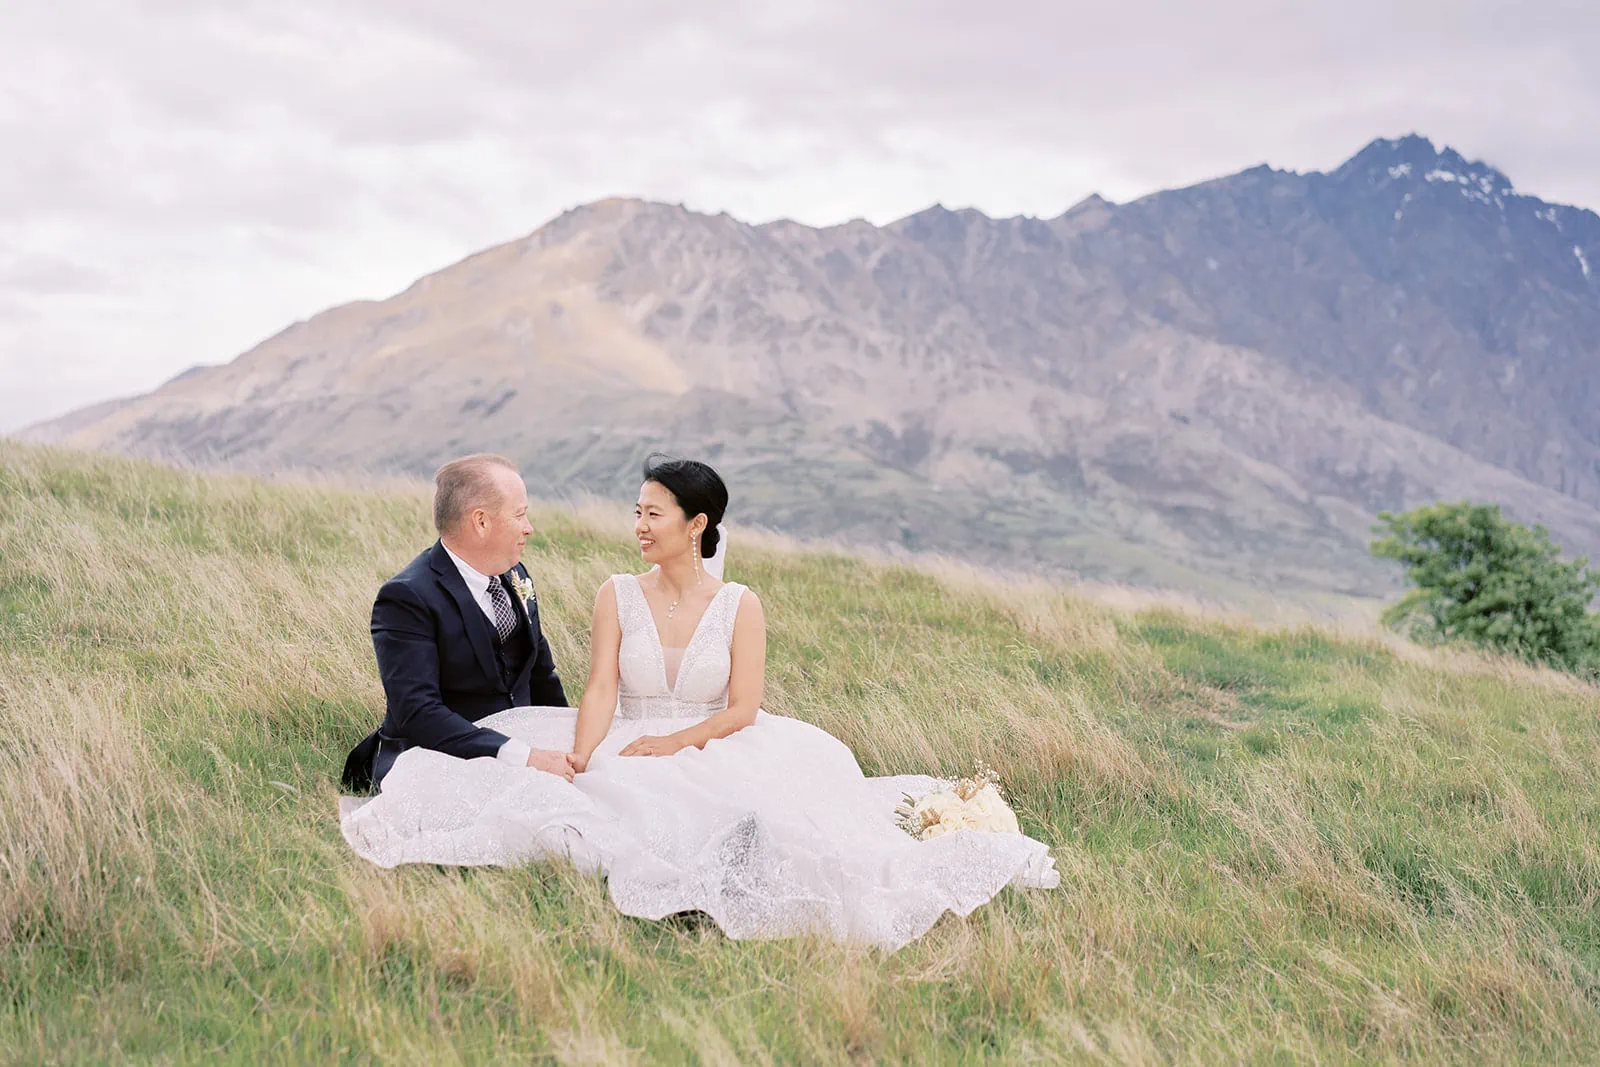 Queenstown Elopement Heli Wedding Photographer クイーンズタウン結婚式 | Joel and Meng sitting in grass with mountains in the background at Stoneridge Estate.